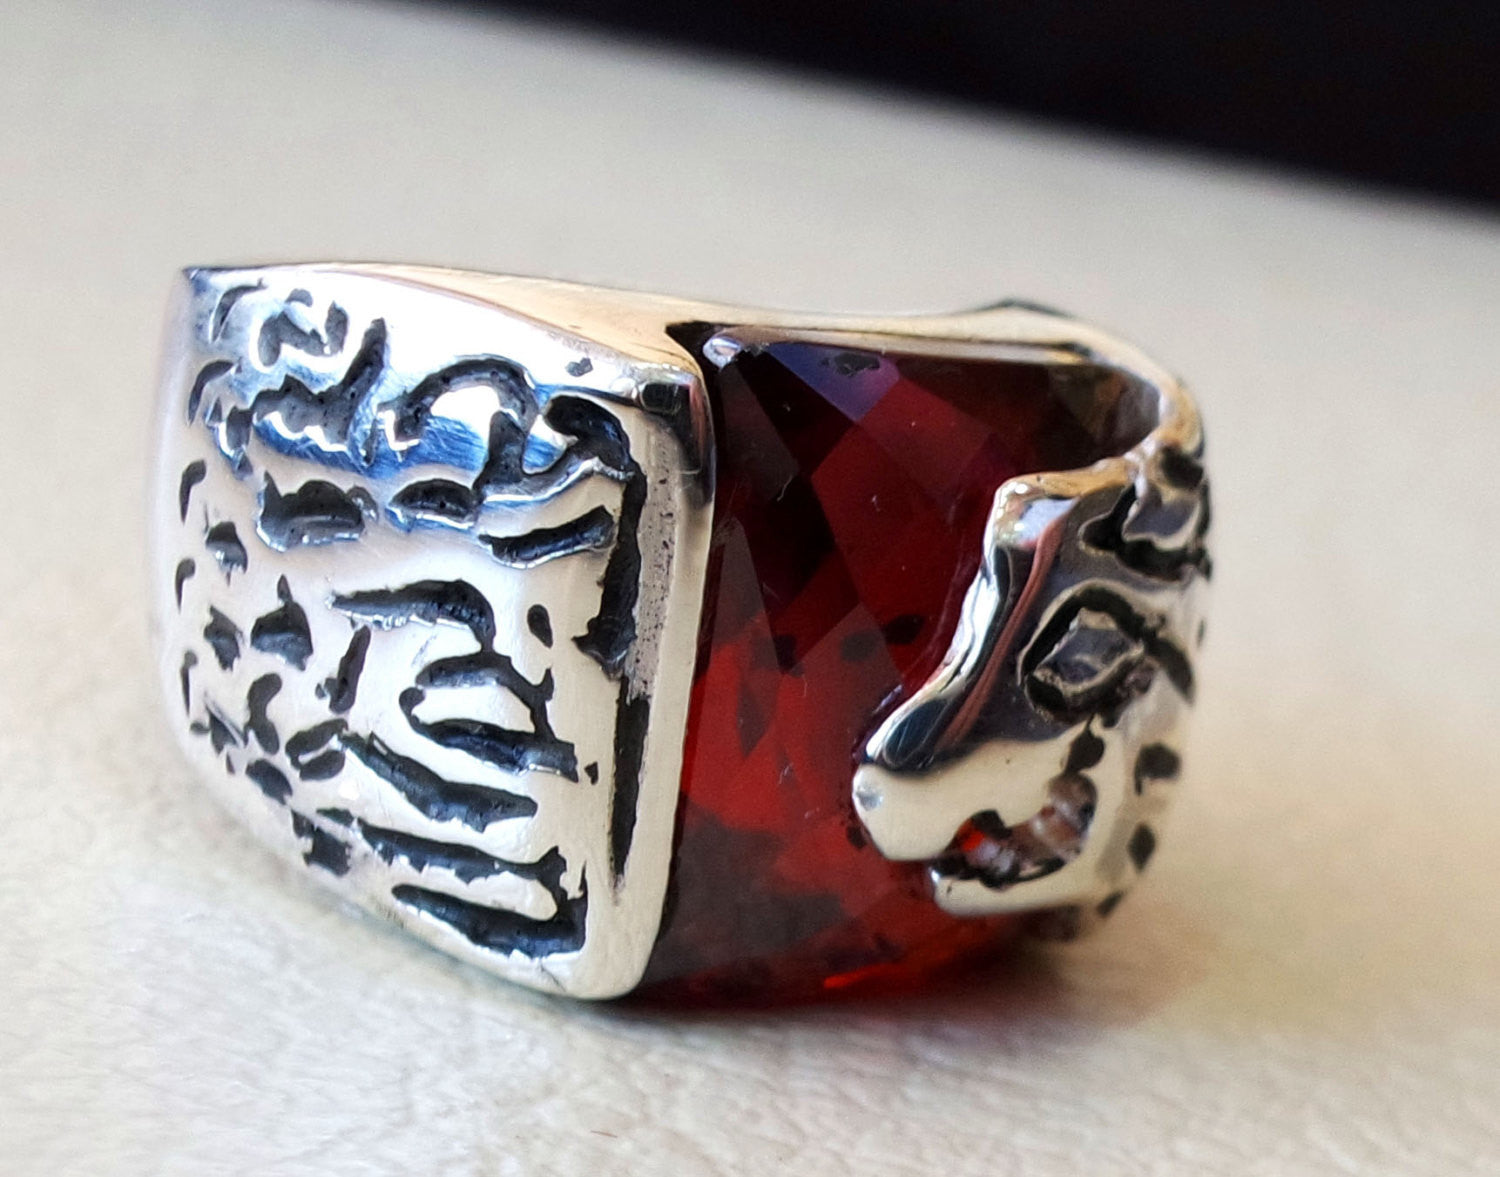 red ruby color cabochon octagon stone lion man ring sterling silver 925 all sizes high quality jewelry ottoman middle eastern antique style